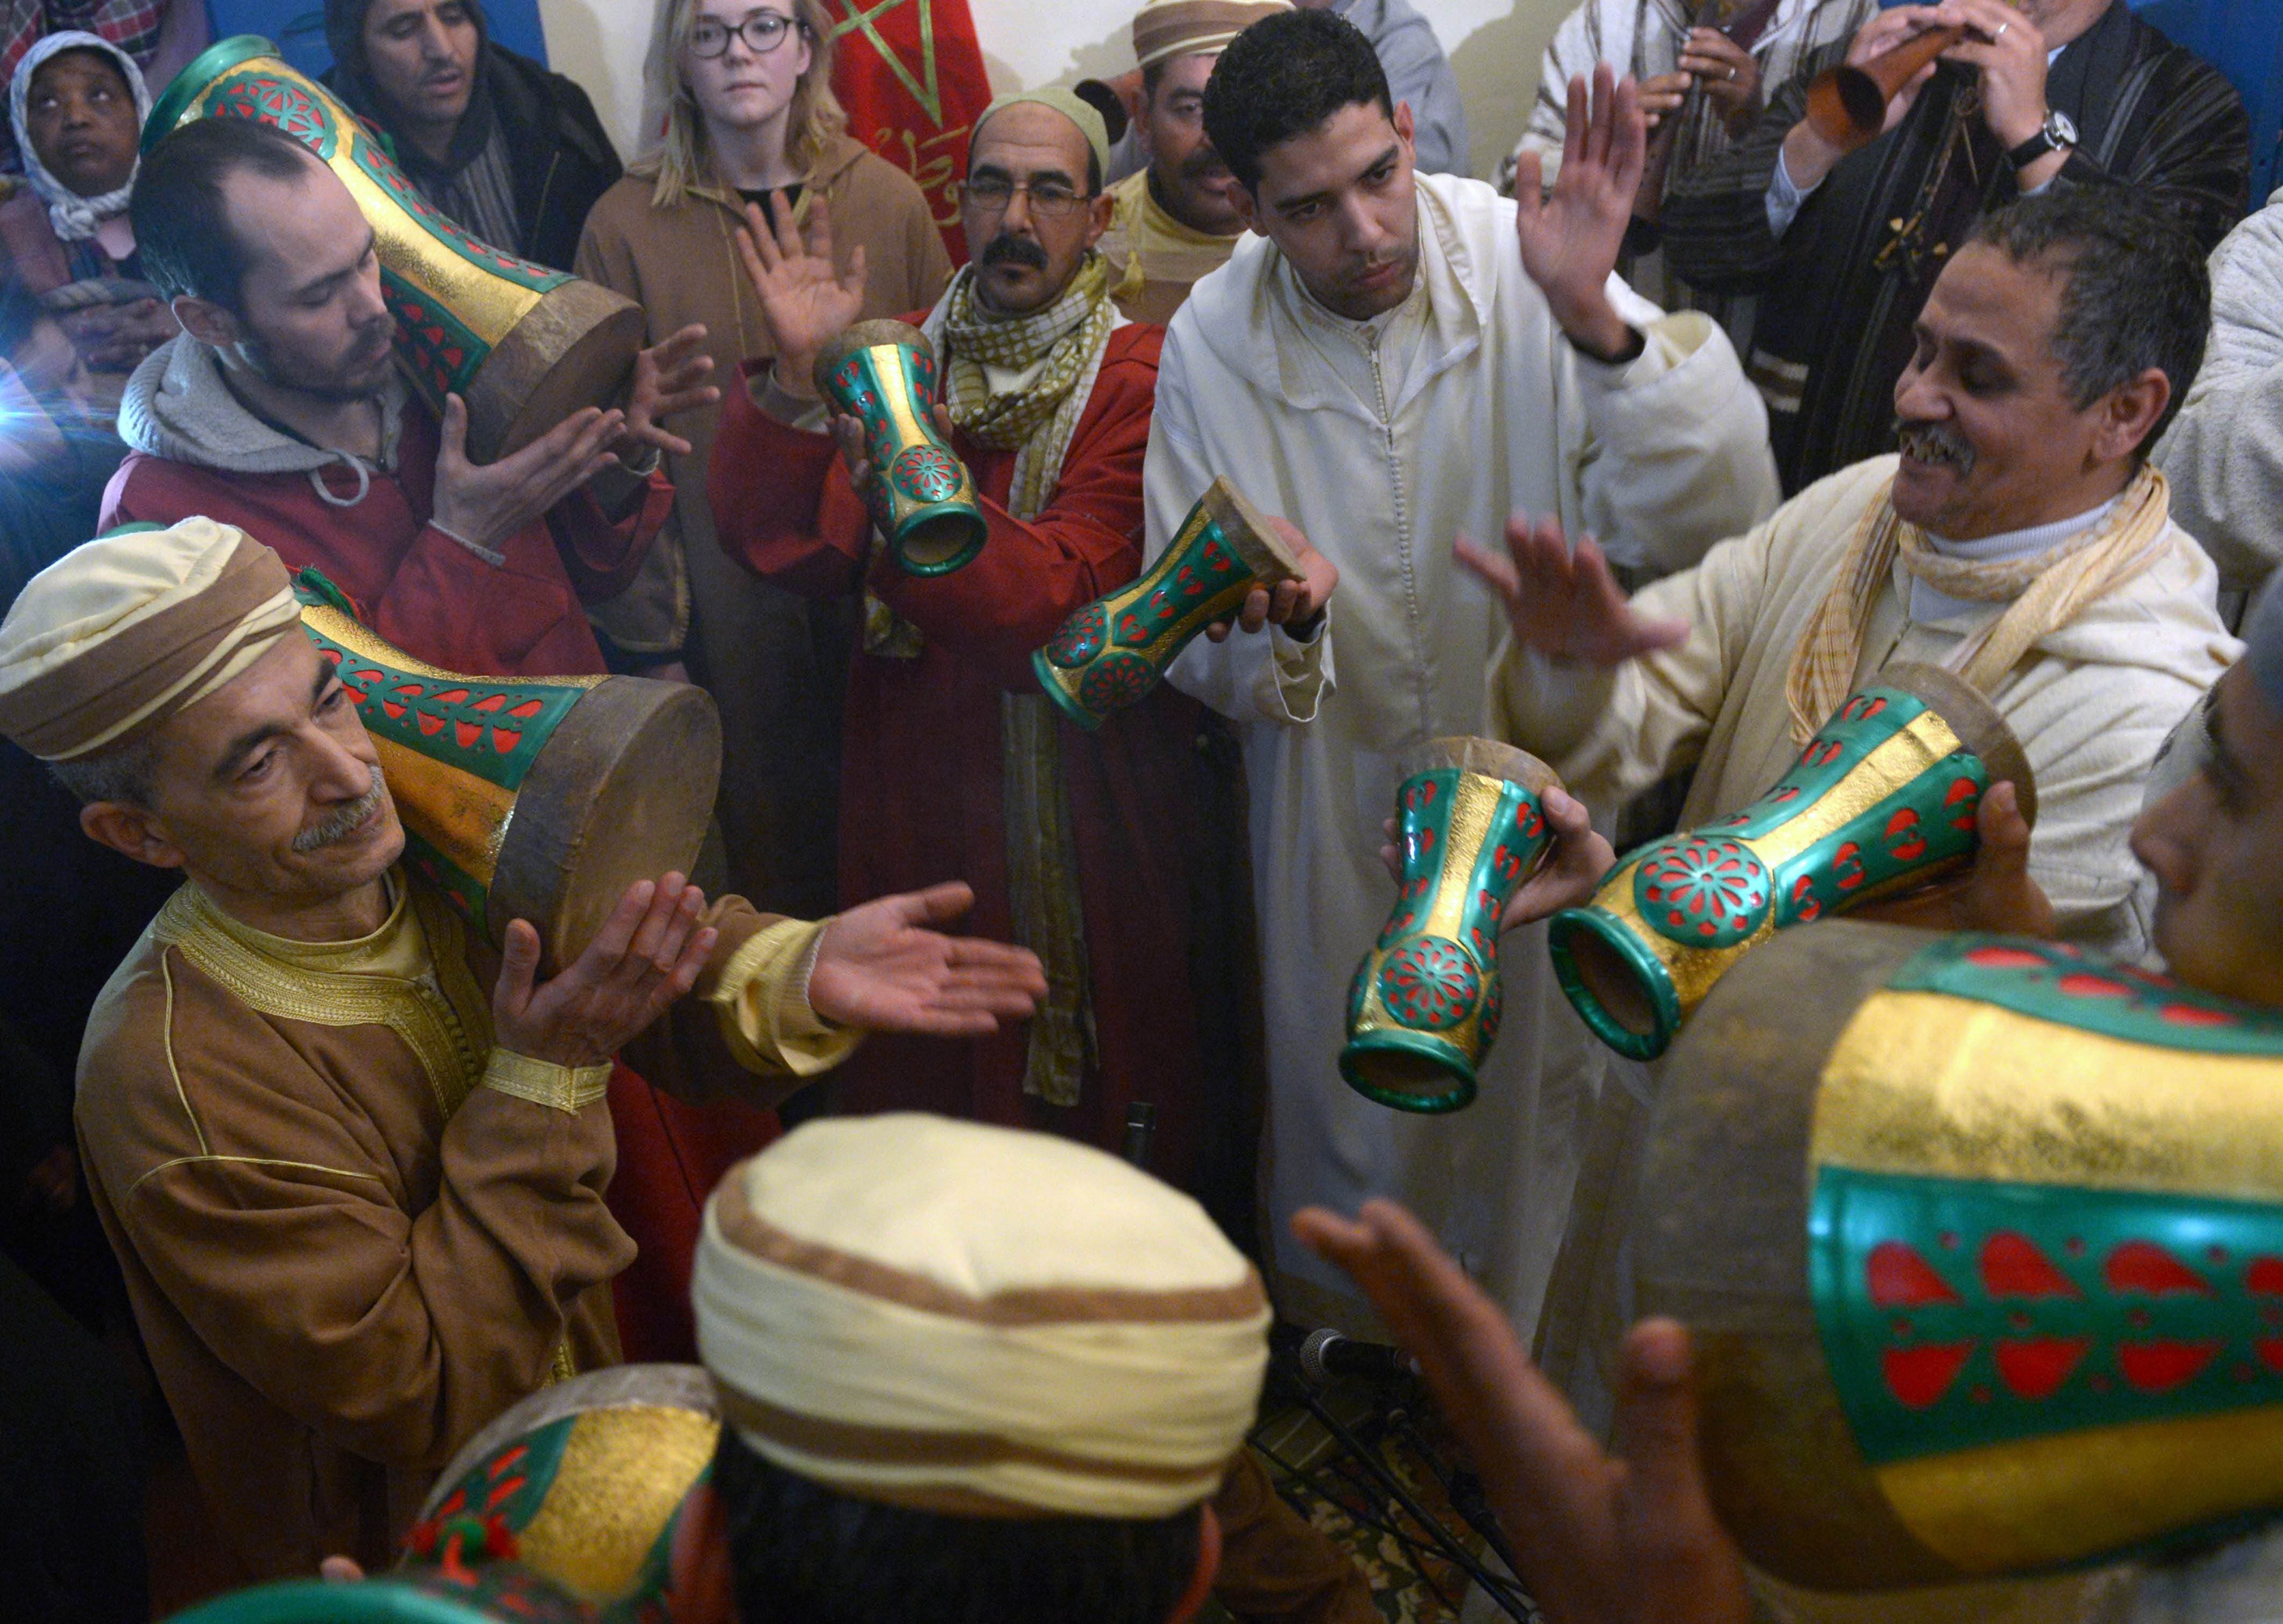 Sorcery and spirits at Morocco Sufi festival